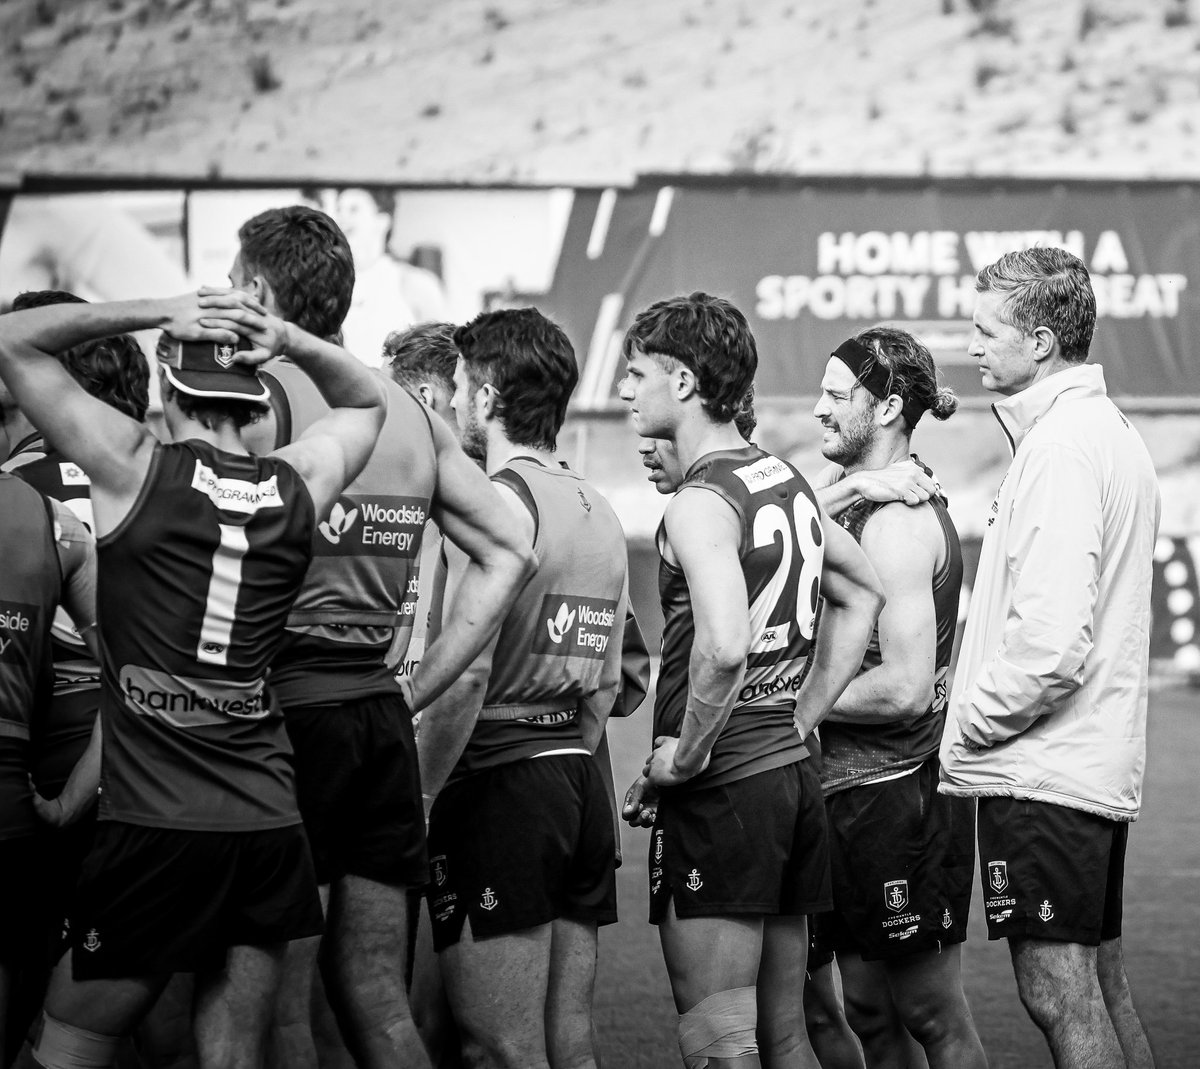 'Behind Every Good Team is a Great Coach' 

#fridayflashback #fridayquote
#quoteoftheday #freopics #foreverfreo #canoncapture